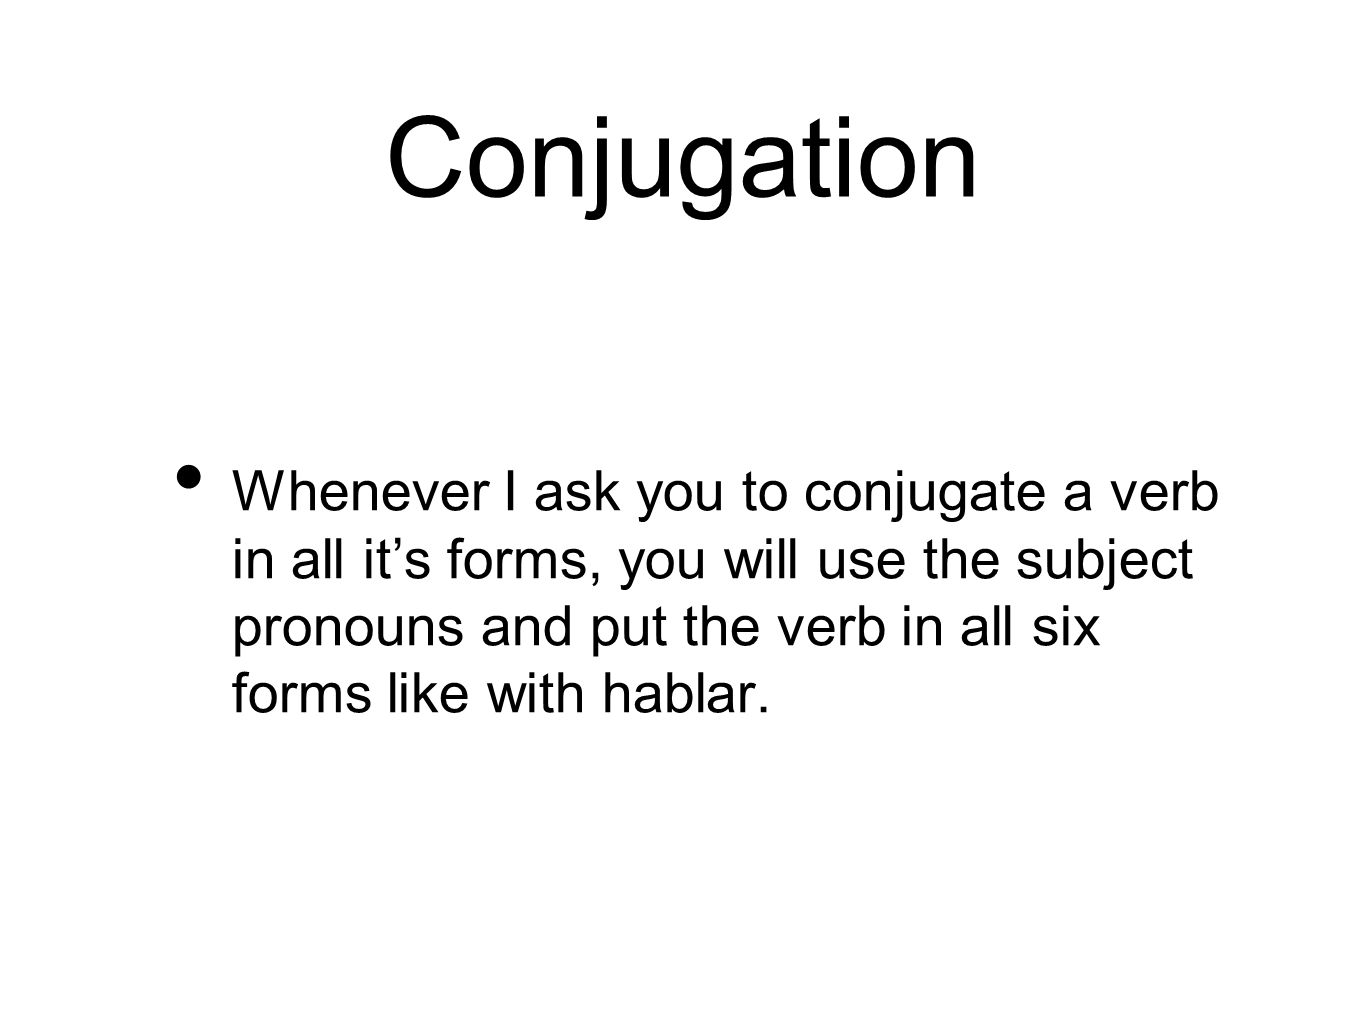 Conjugation Whenever I ask you to conjugate a verb in all it’s forms, you will use the subject pronouns and put the verb in all six forms like with hablar.